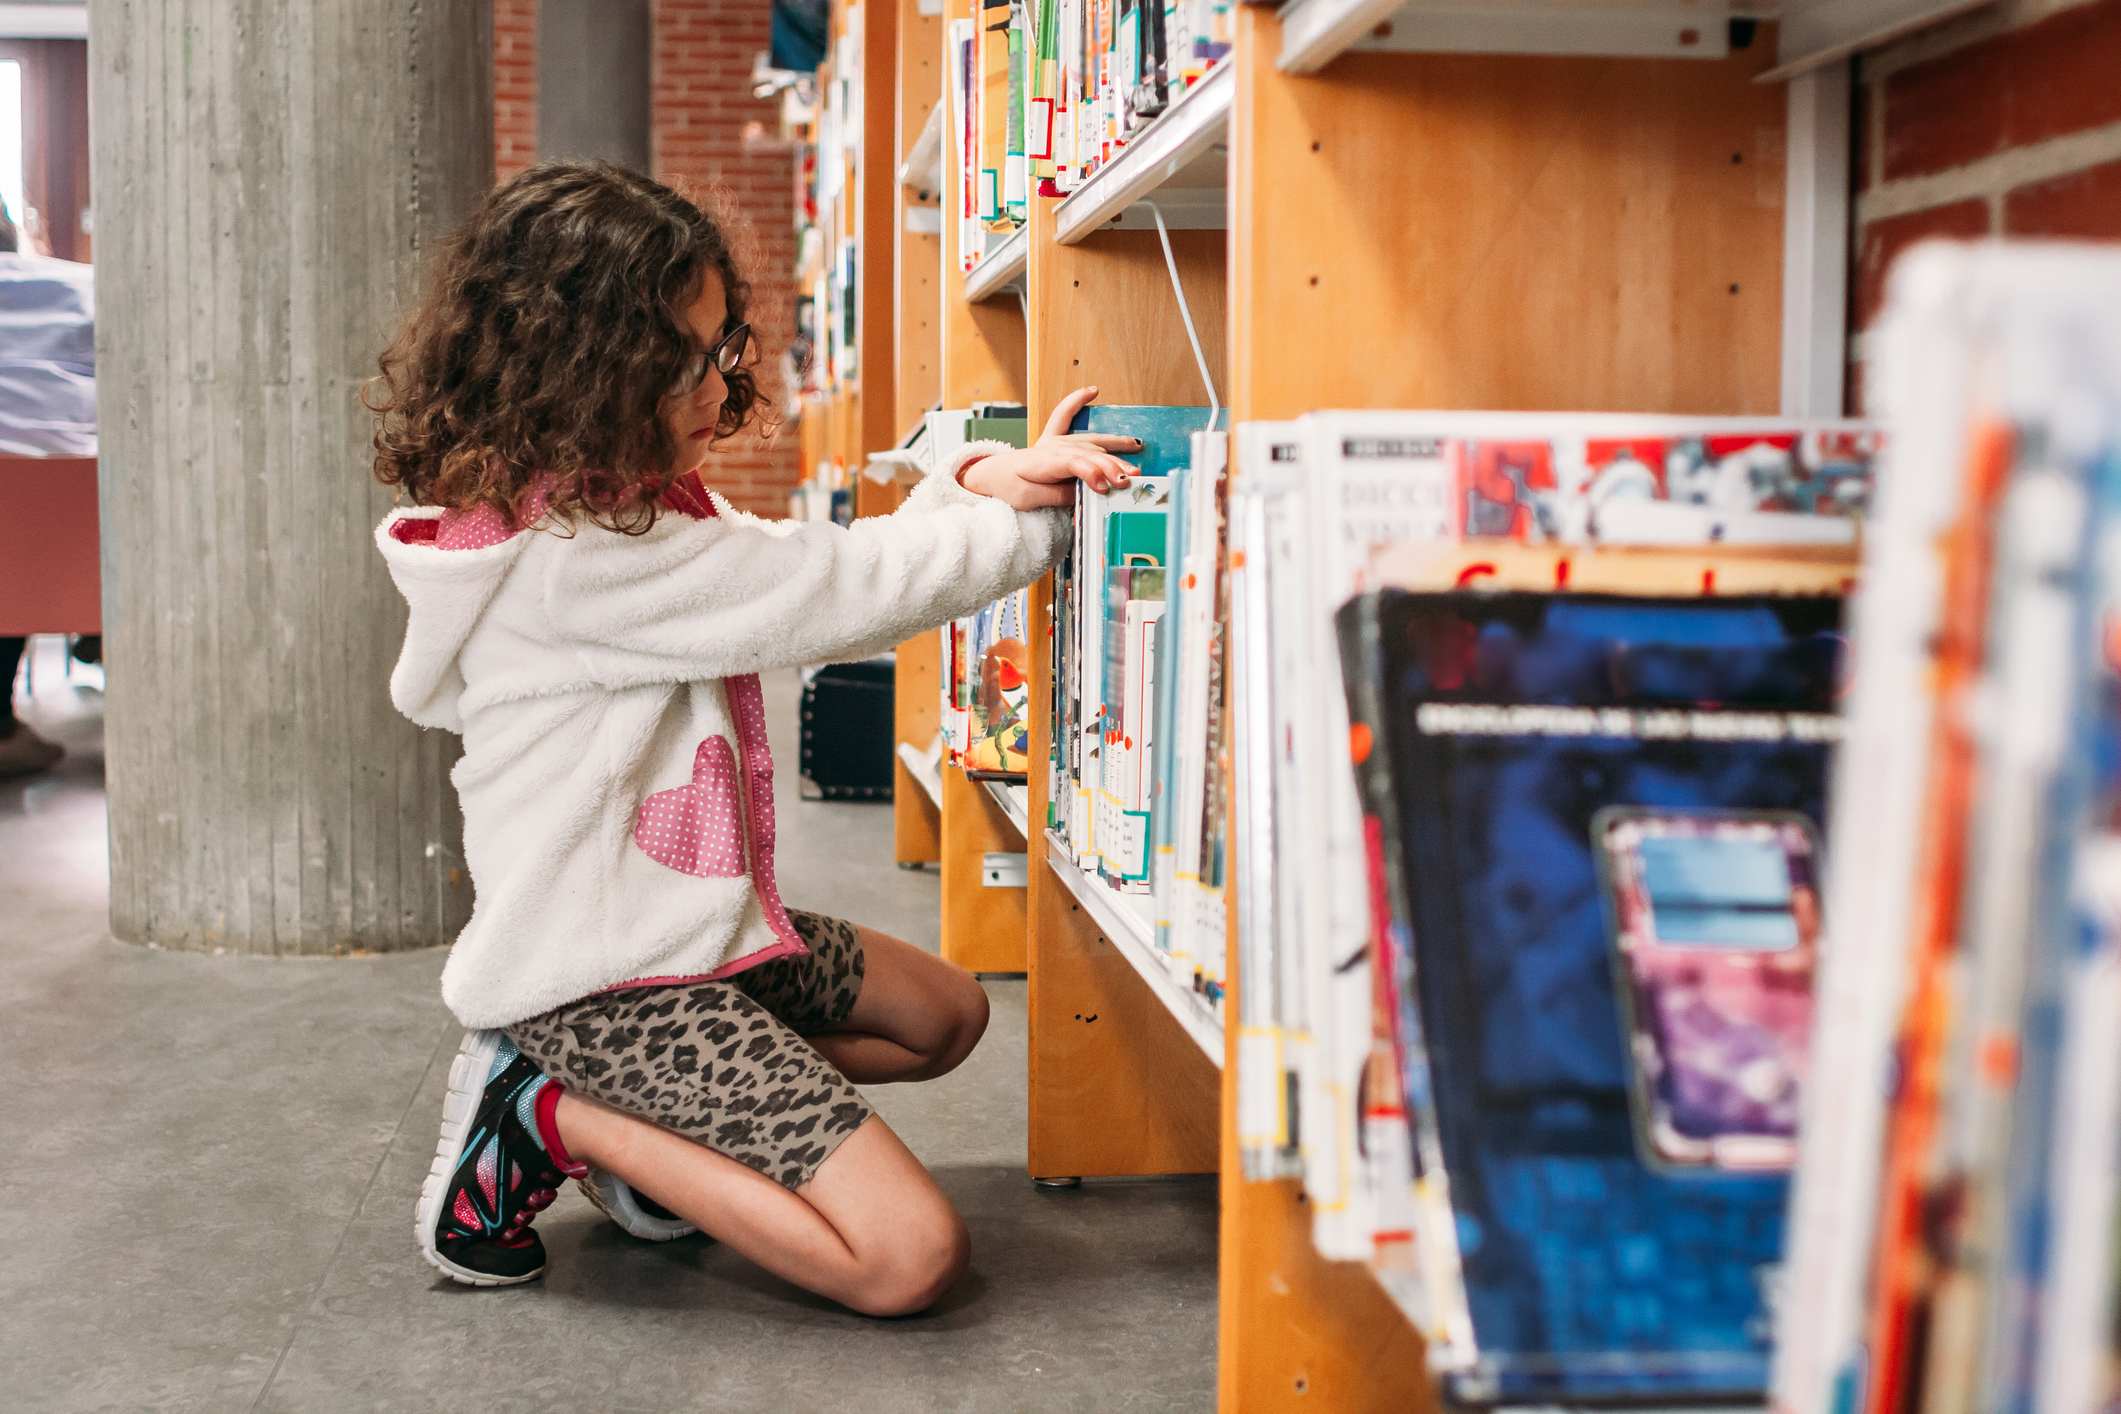 Girl choosing books from the shelves of the public library